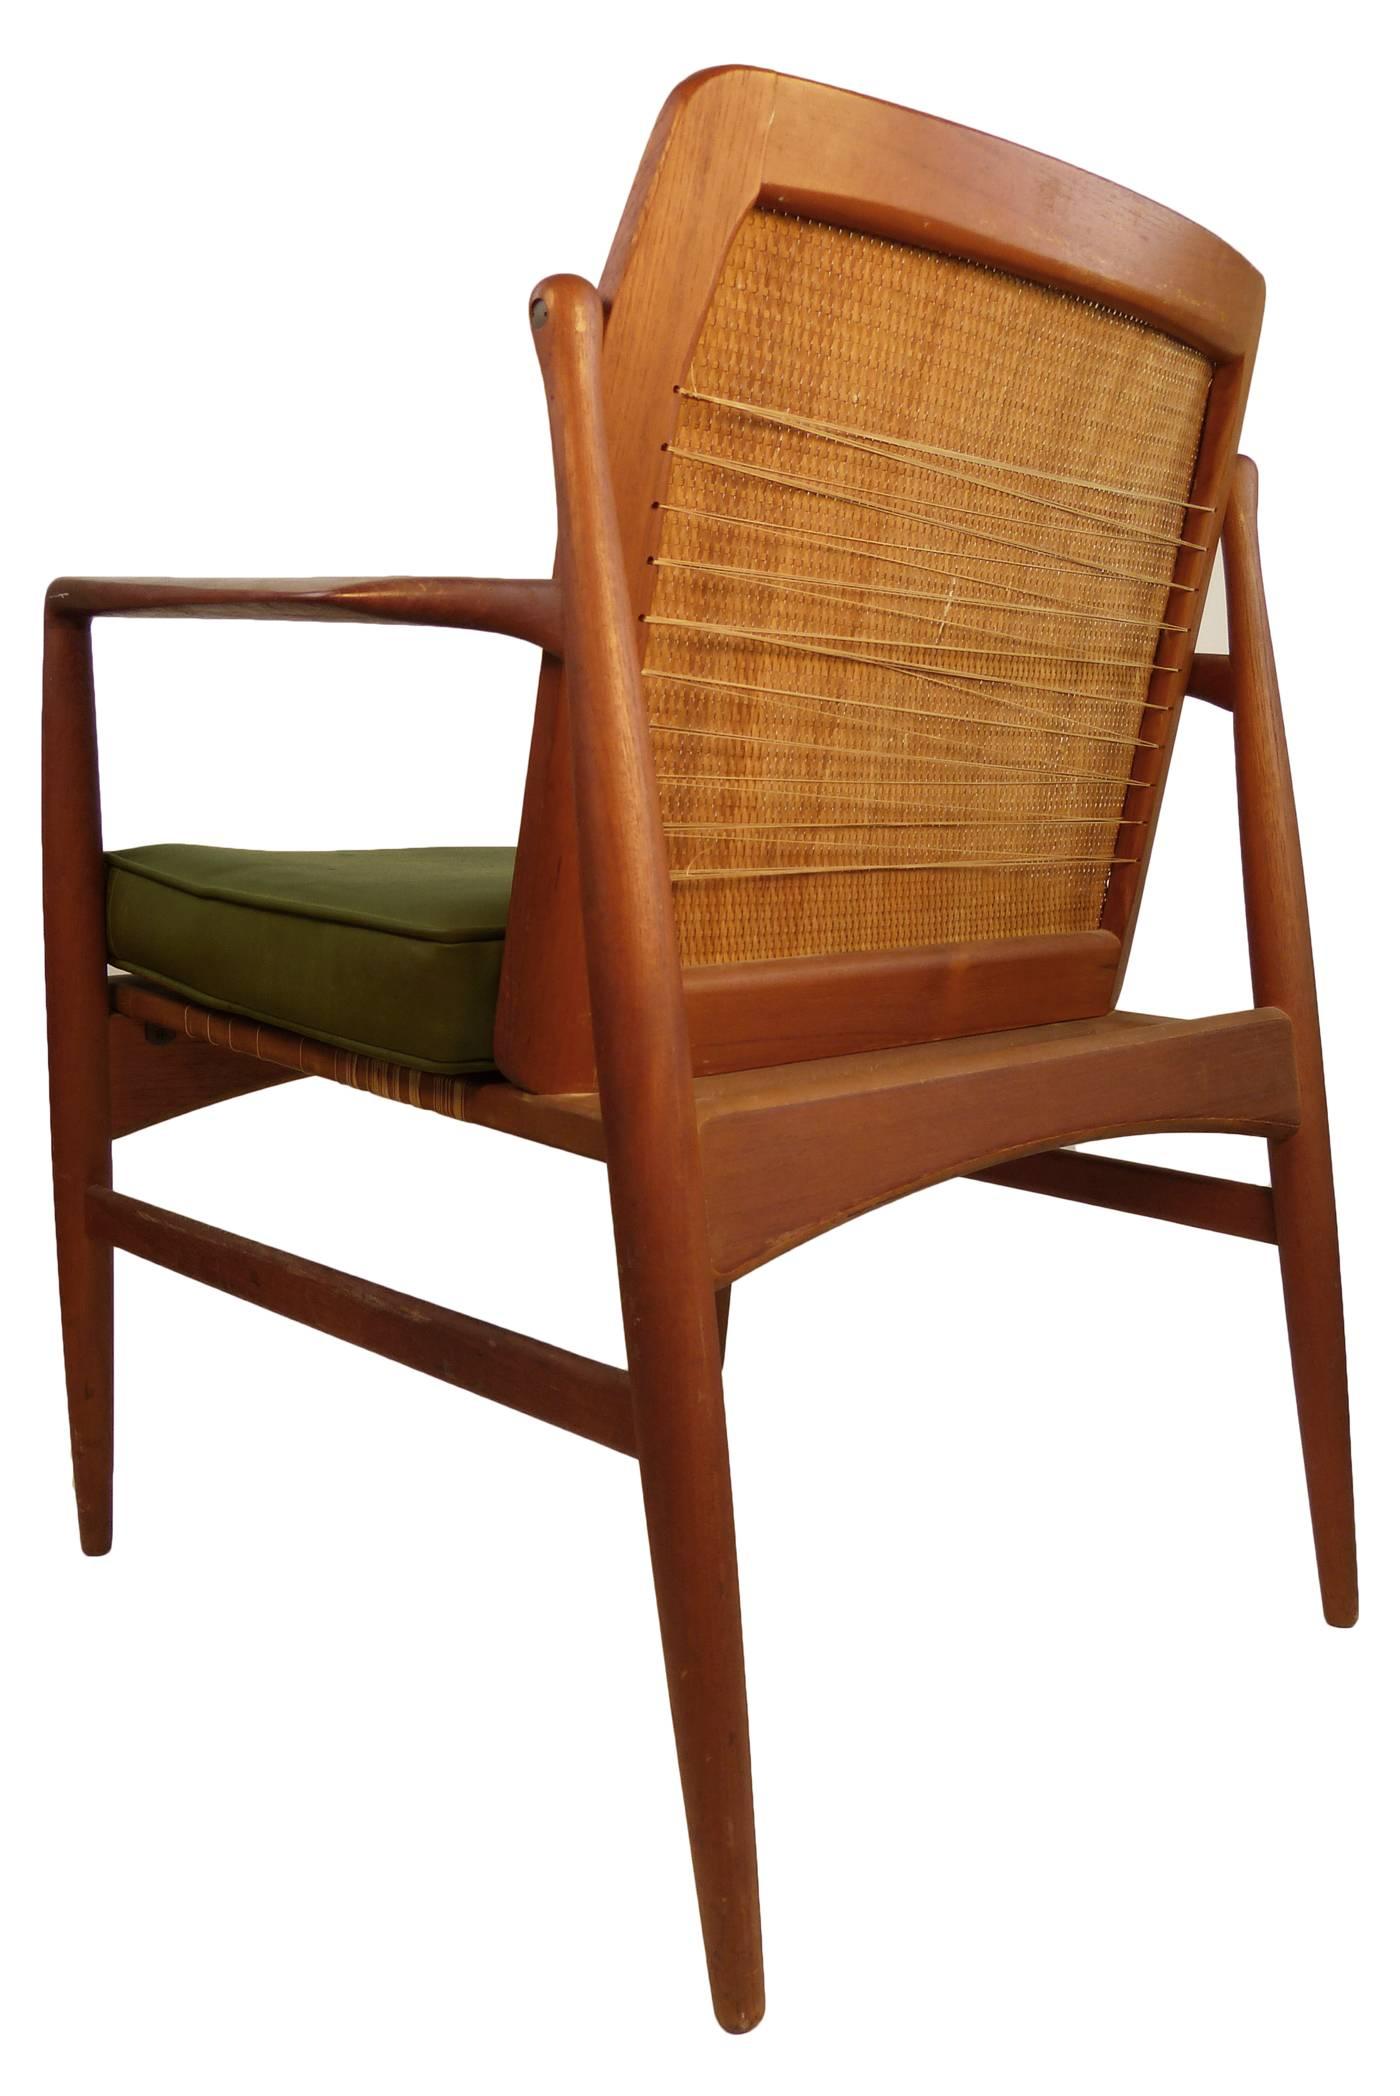 Danish Caned Side Chair by Ib-Kofod Larsen, circa 1960 For Sale